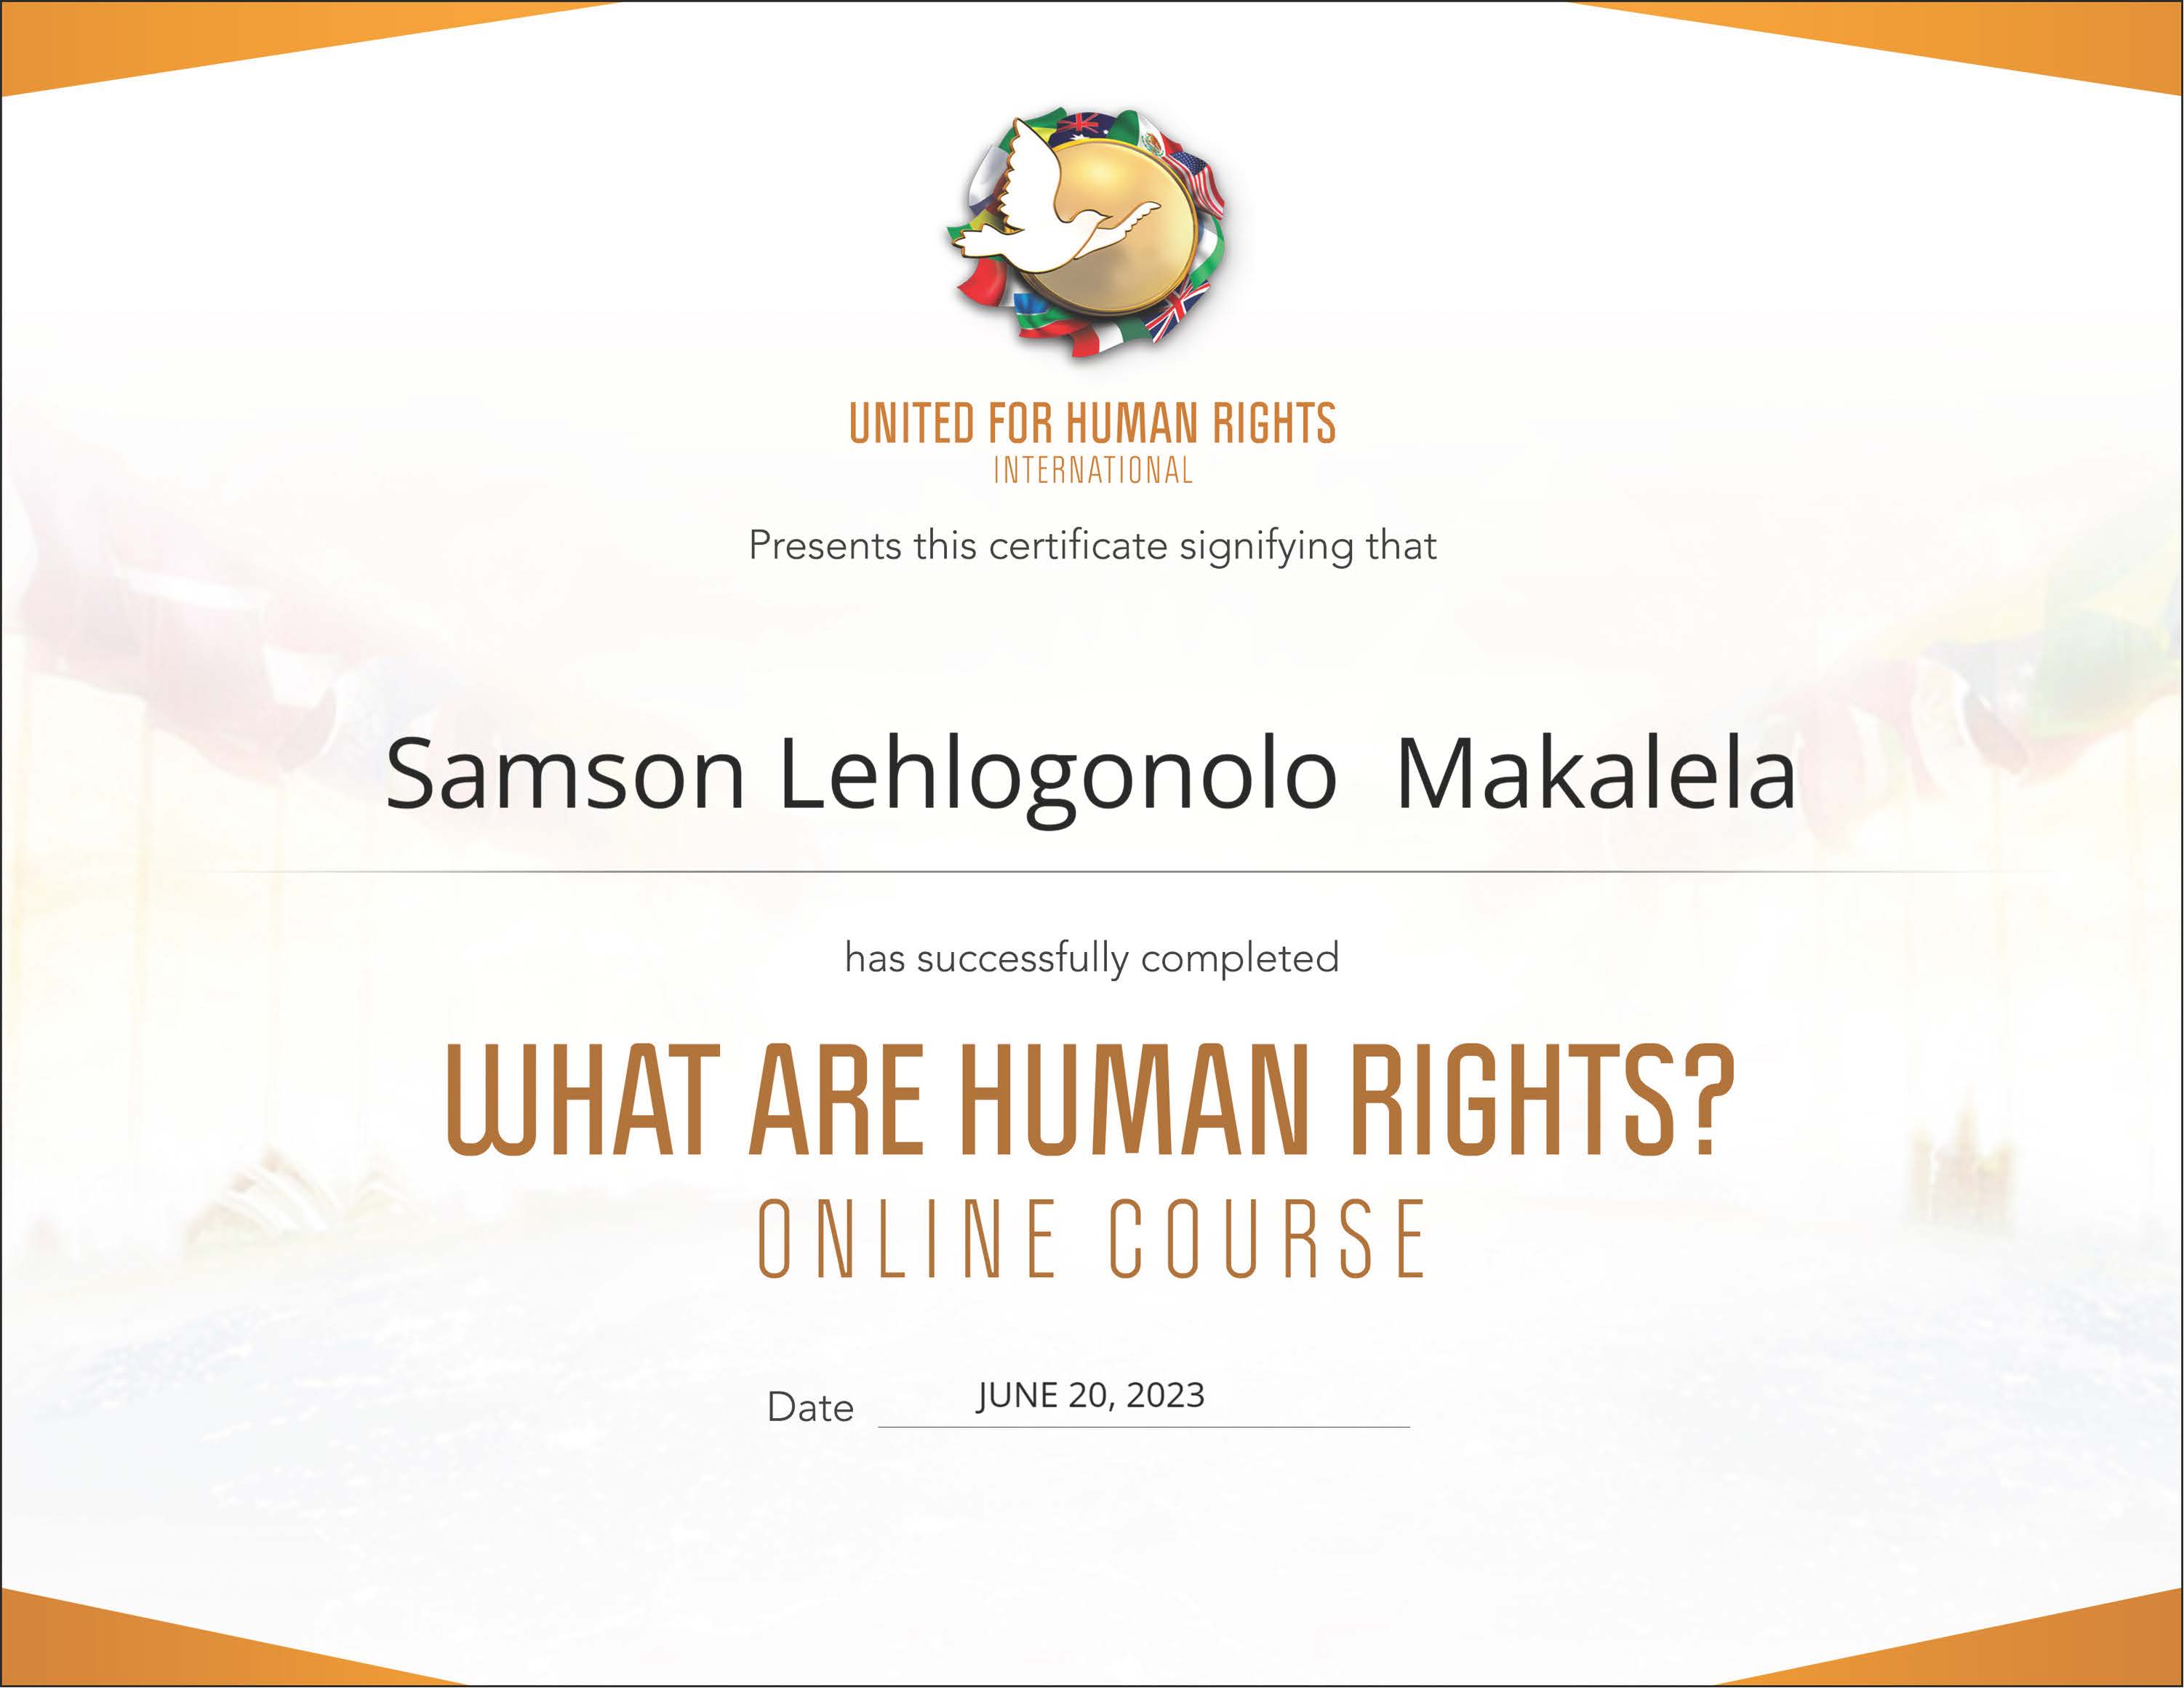 UNITED FOR HUMAN RIGHTS
INTERNATIONAL

Presents this certificate signifying that

Samson Lehlogonolo Makalela

has successfully completed

WHAT ARE HUMAN RIGHTS?
ONLINE COURSE

Date JUNE 20, 2023